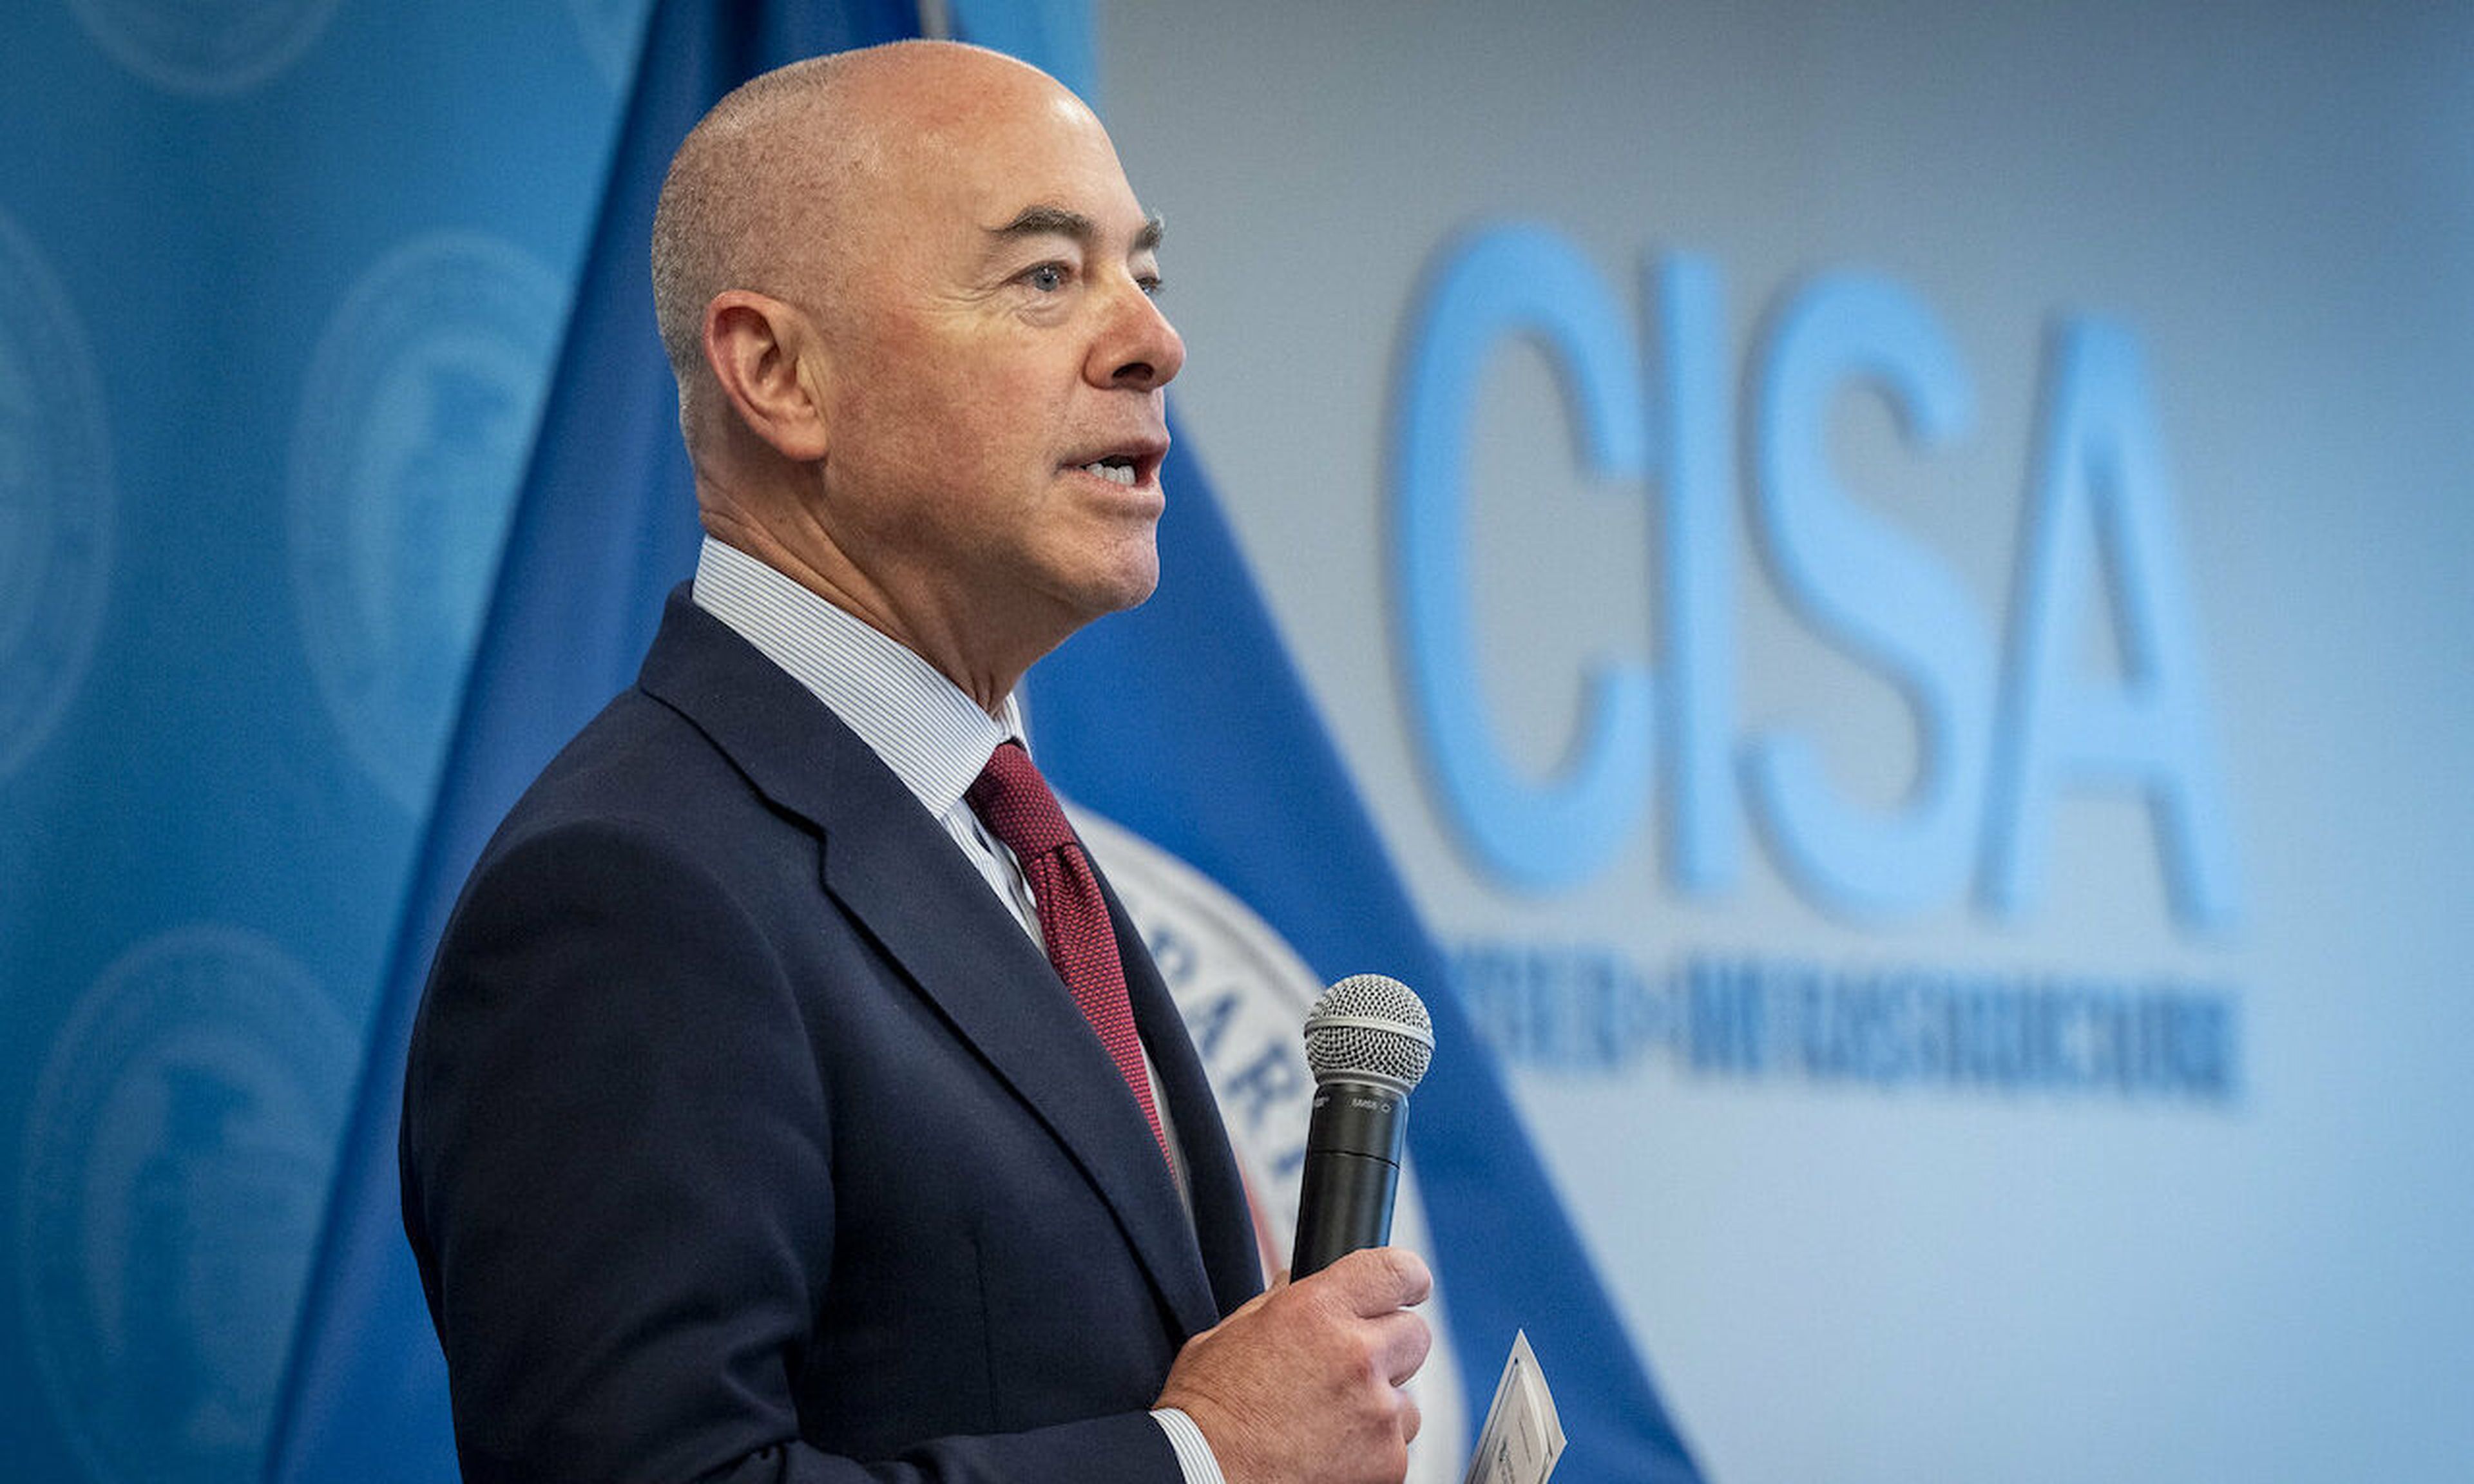 Homeland Security Secretary Alejandro Mayorkas participates in the swearing in of new Cybersecurity and Infrastructure Security Agency (CISA) director Jen Easterly at CISA Headquarters in Arlington, VA. CISA released new cybersecurity performance goals for critical infrastructure and private businesses. (DHS)